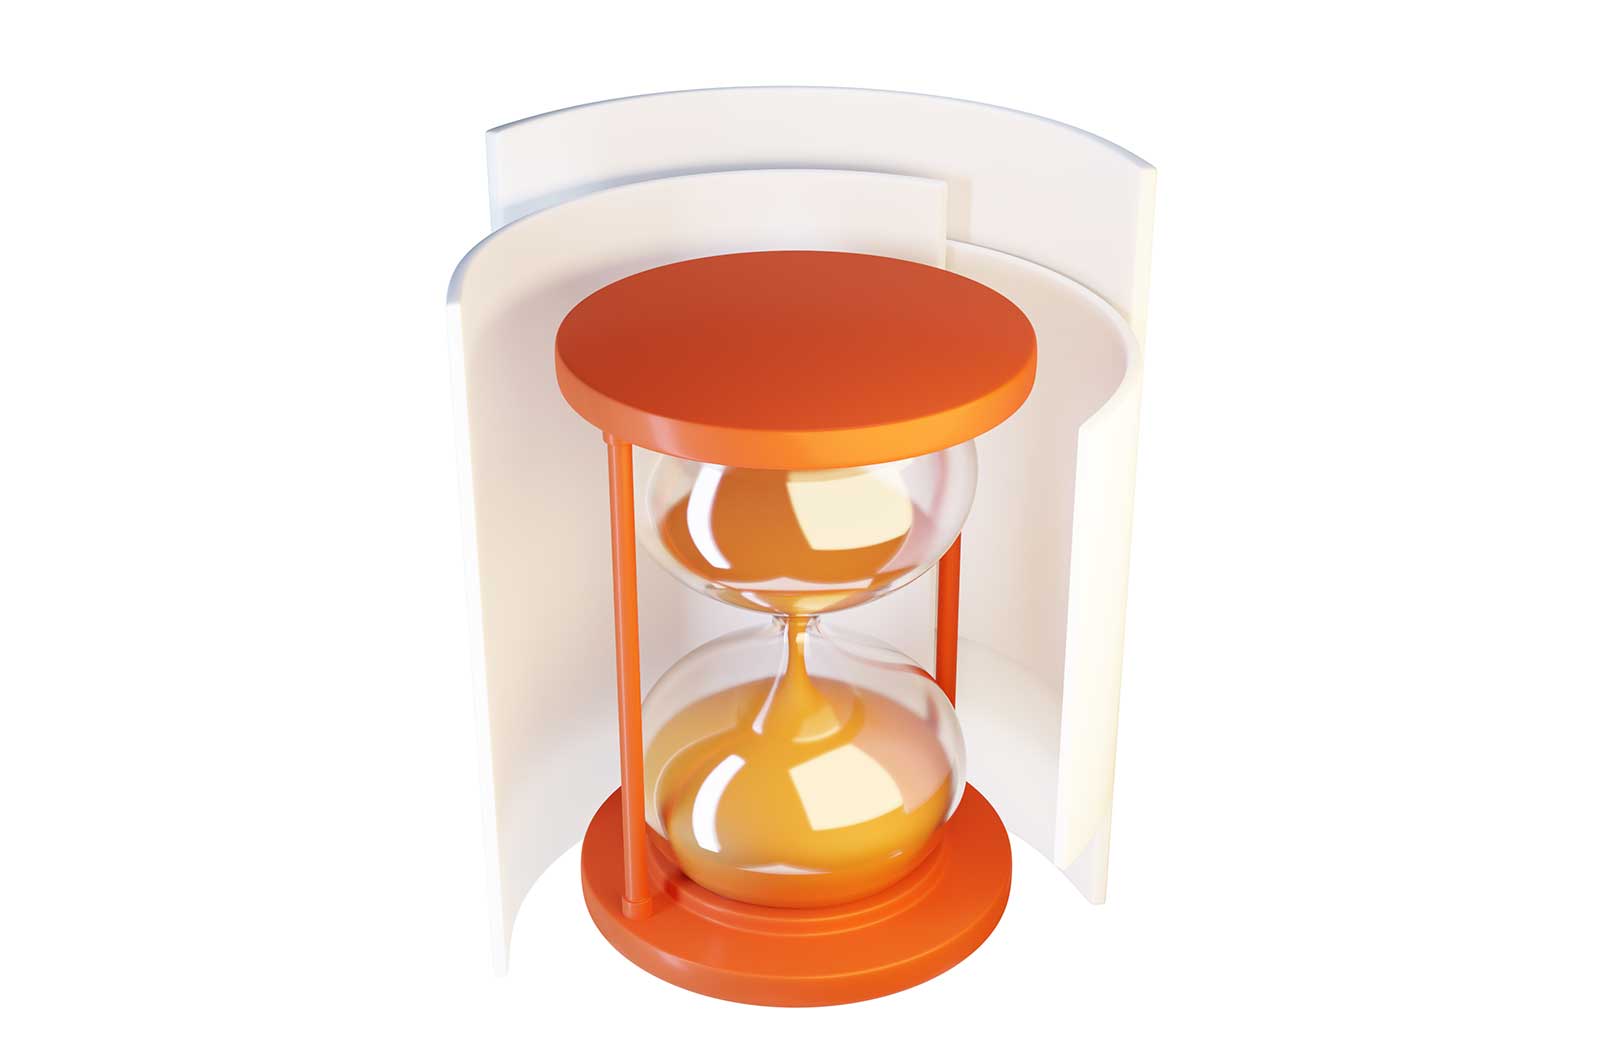 Hourglass, sand clock icon, time management project vector illustration. Invertible device 3d renderted illustration.